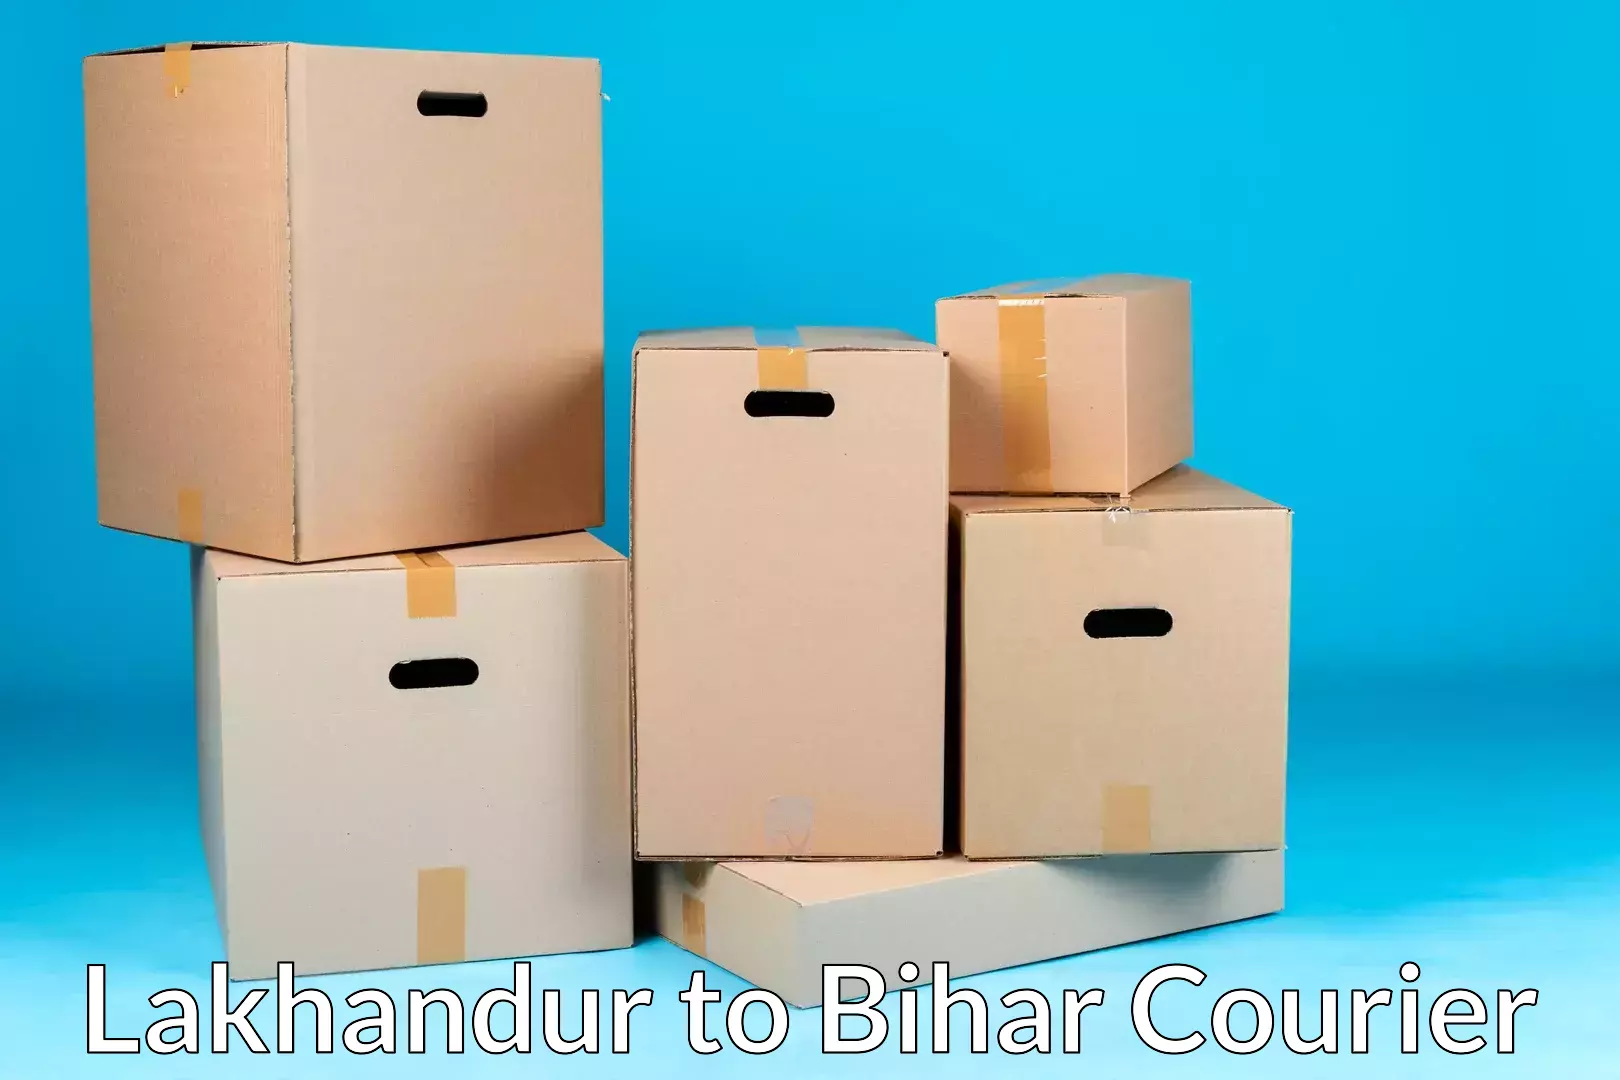 Furniture delivery service Lakhandur to Chainpur